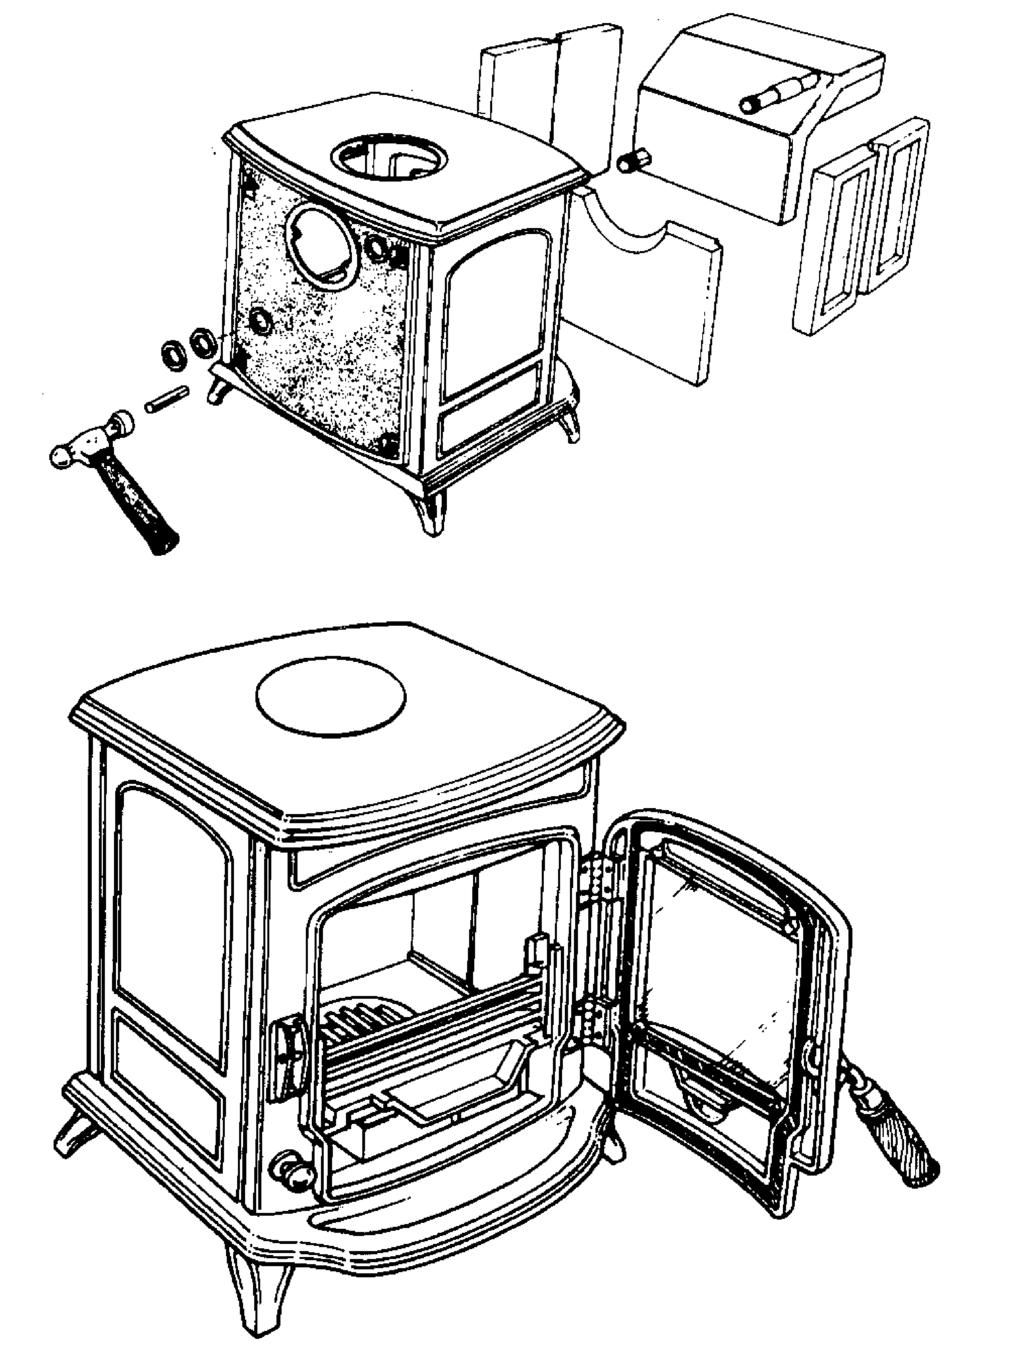 Fig.9 8 8 8 8. Insert boiler through the fire door. 9. Screw the two 28mm (1 ) flange nuts over the boiler connections. (Do not over tighten flange nuts). 10. Replace side bricks. 11.